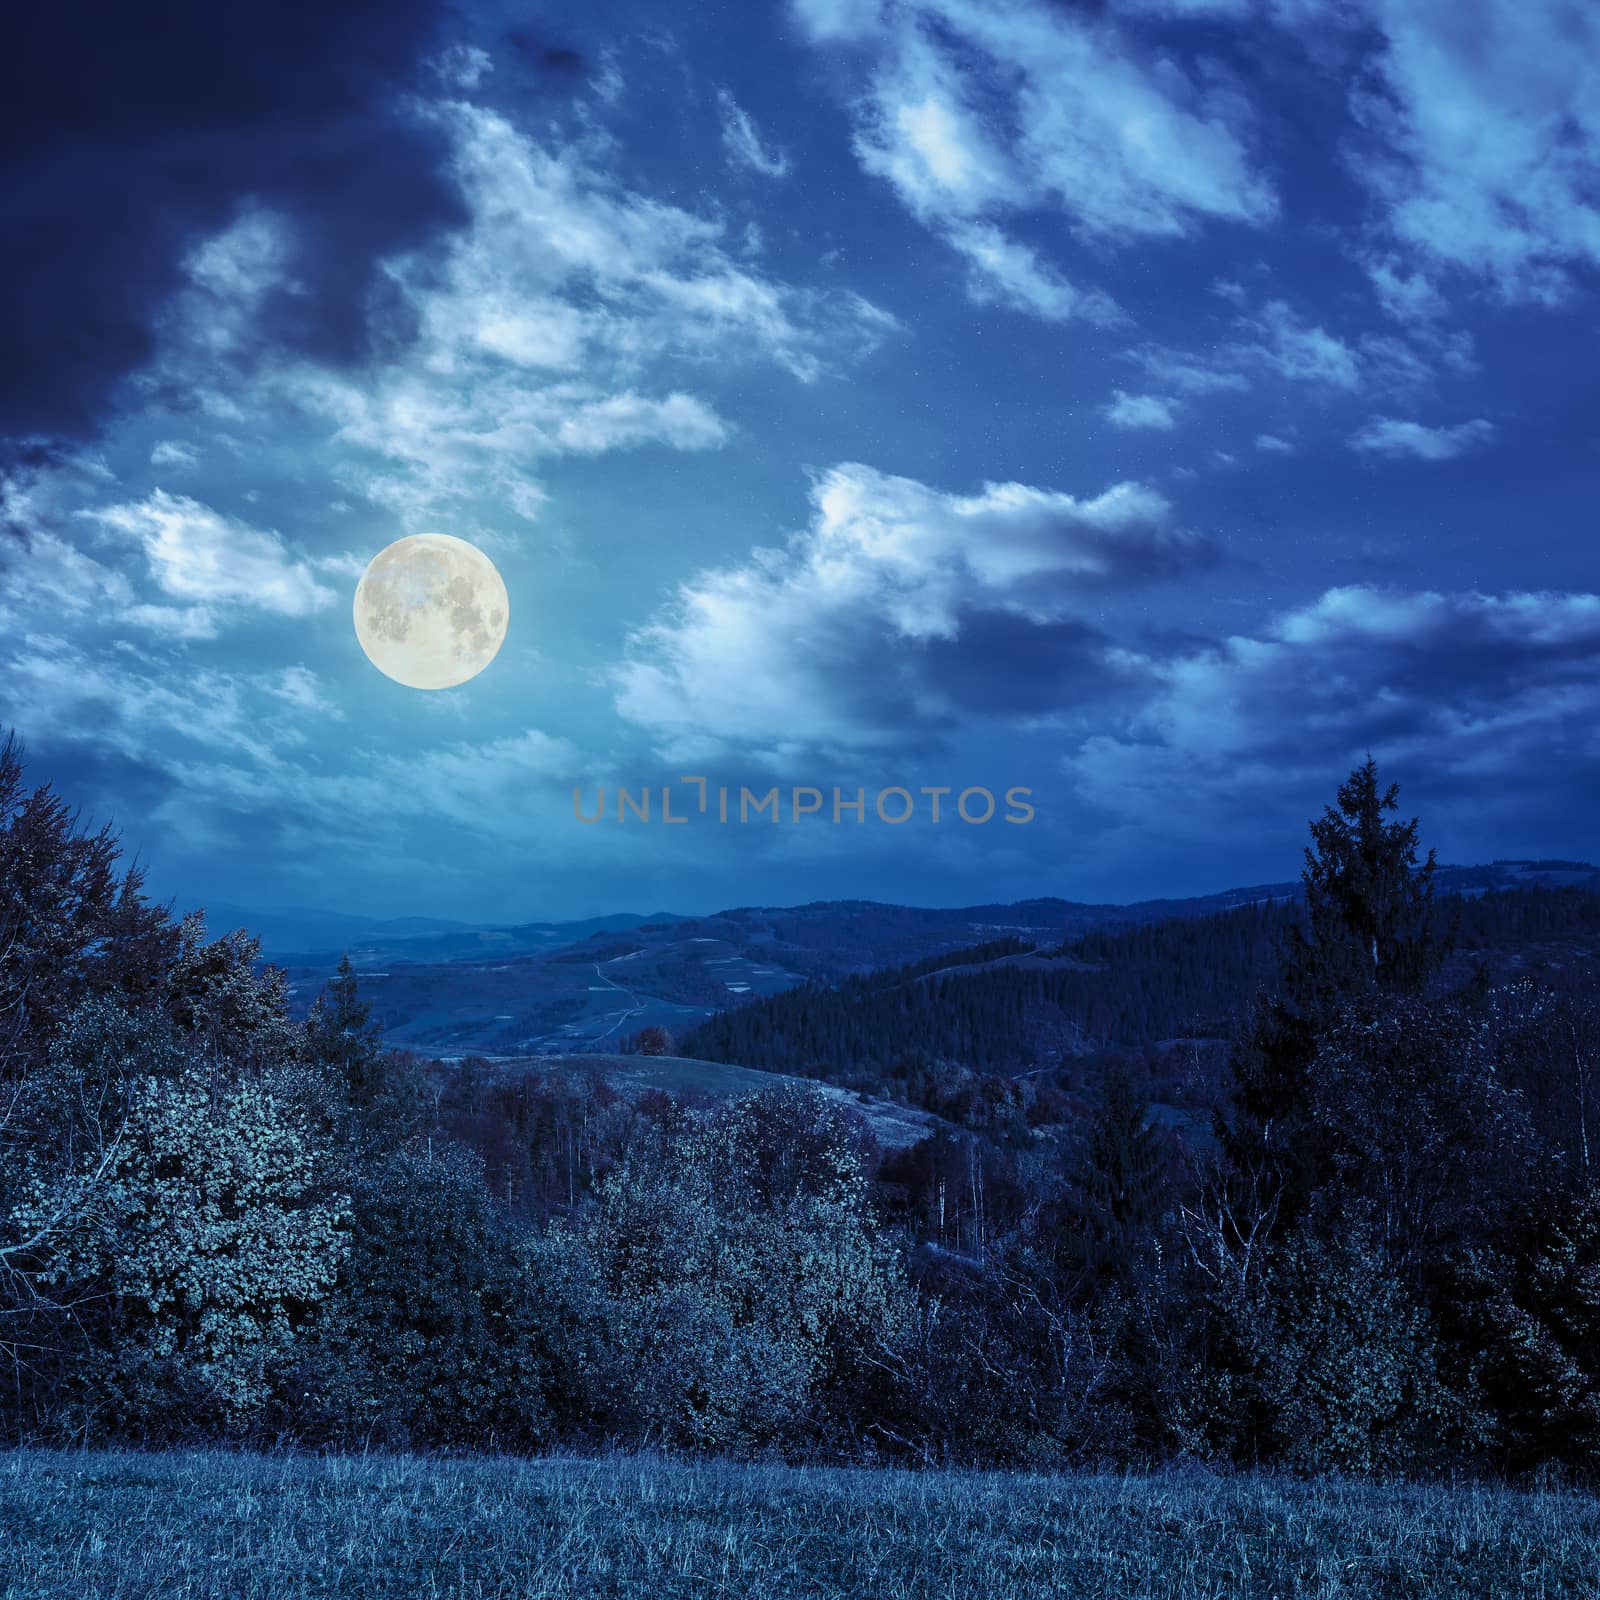 trees on autumn meadow in mountains at night by Pellinni